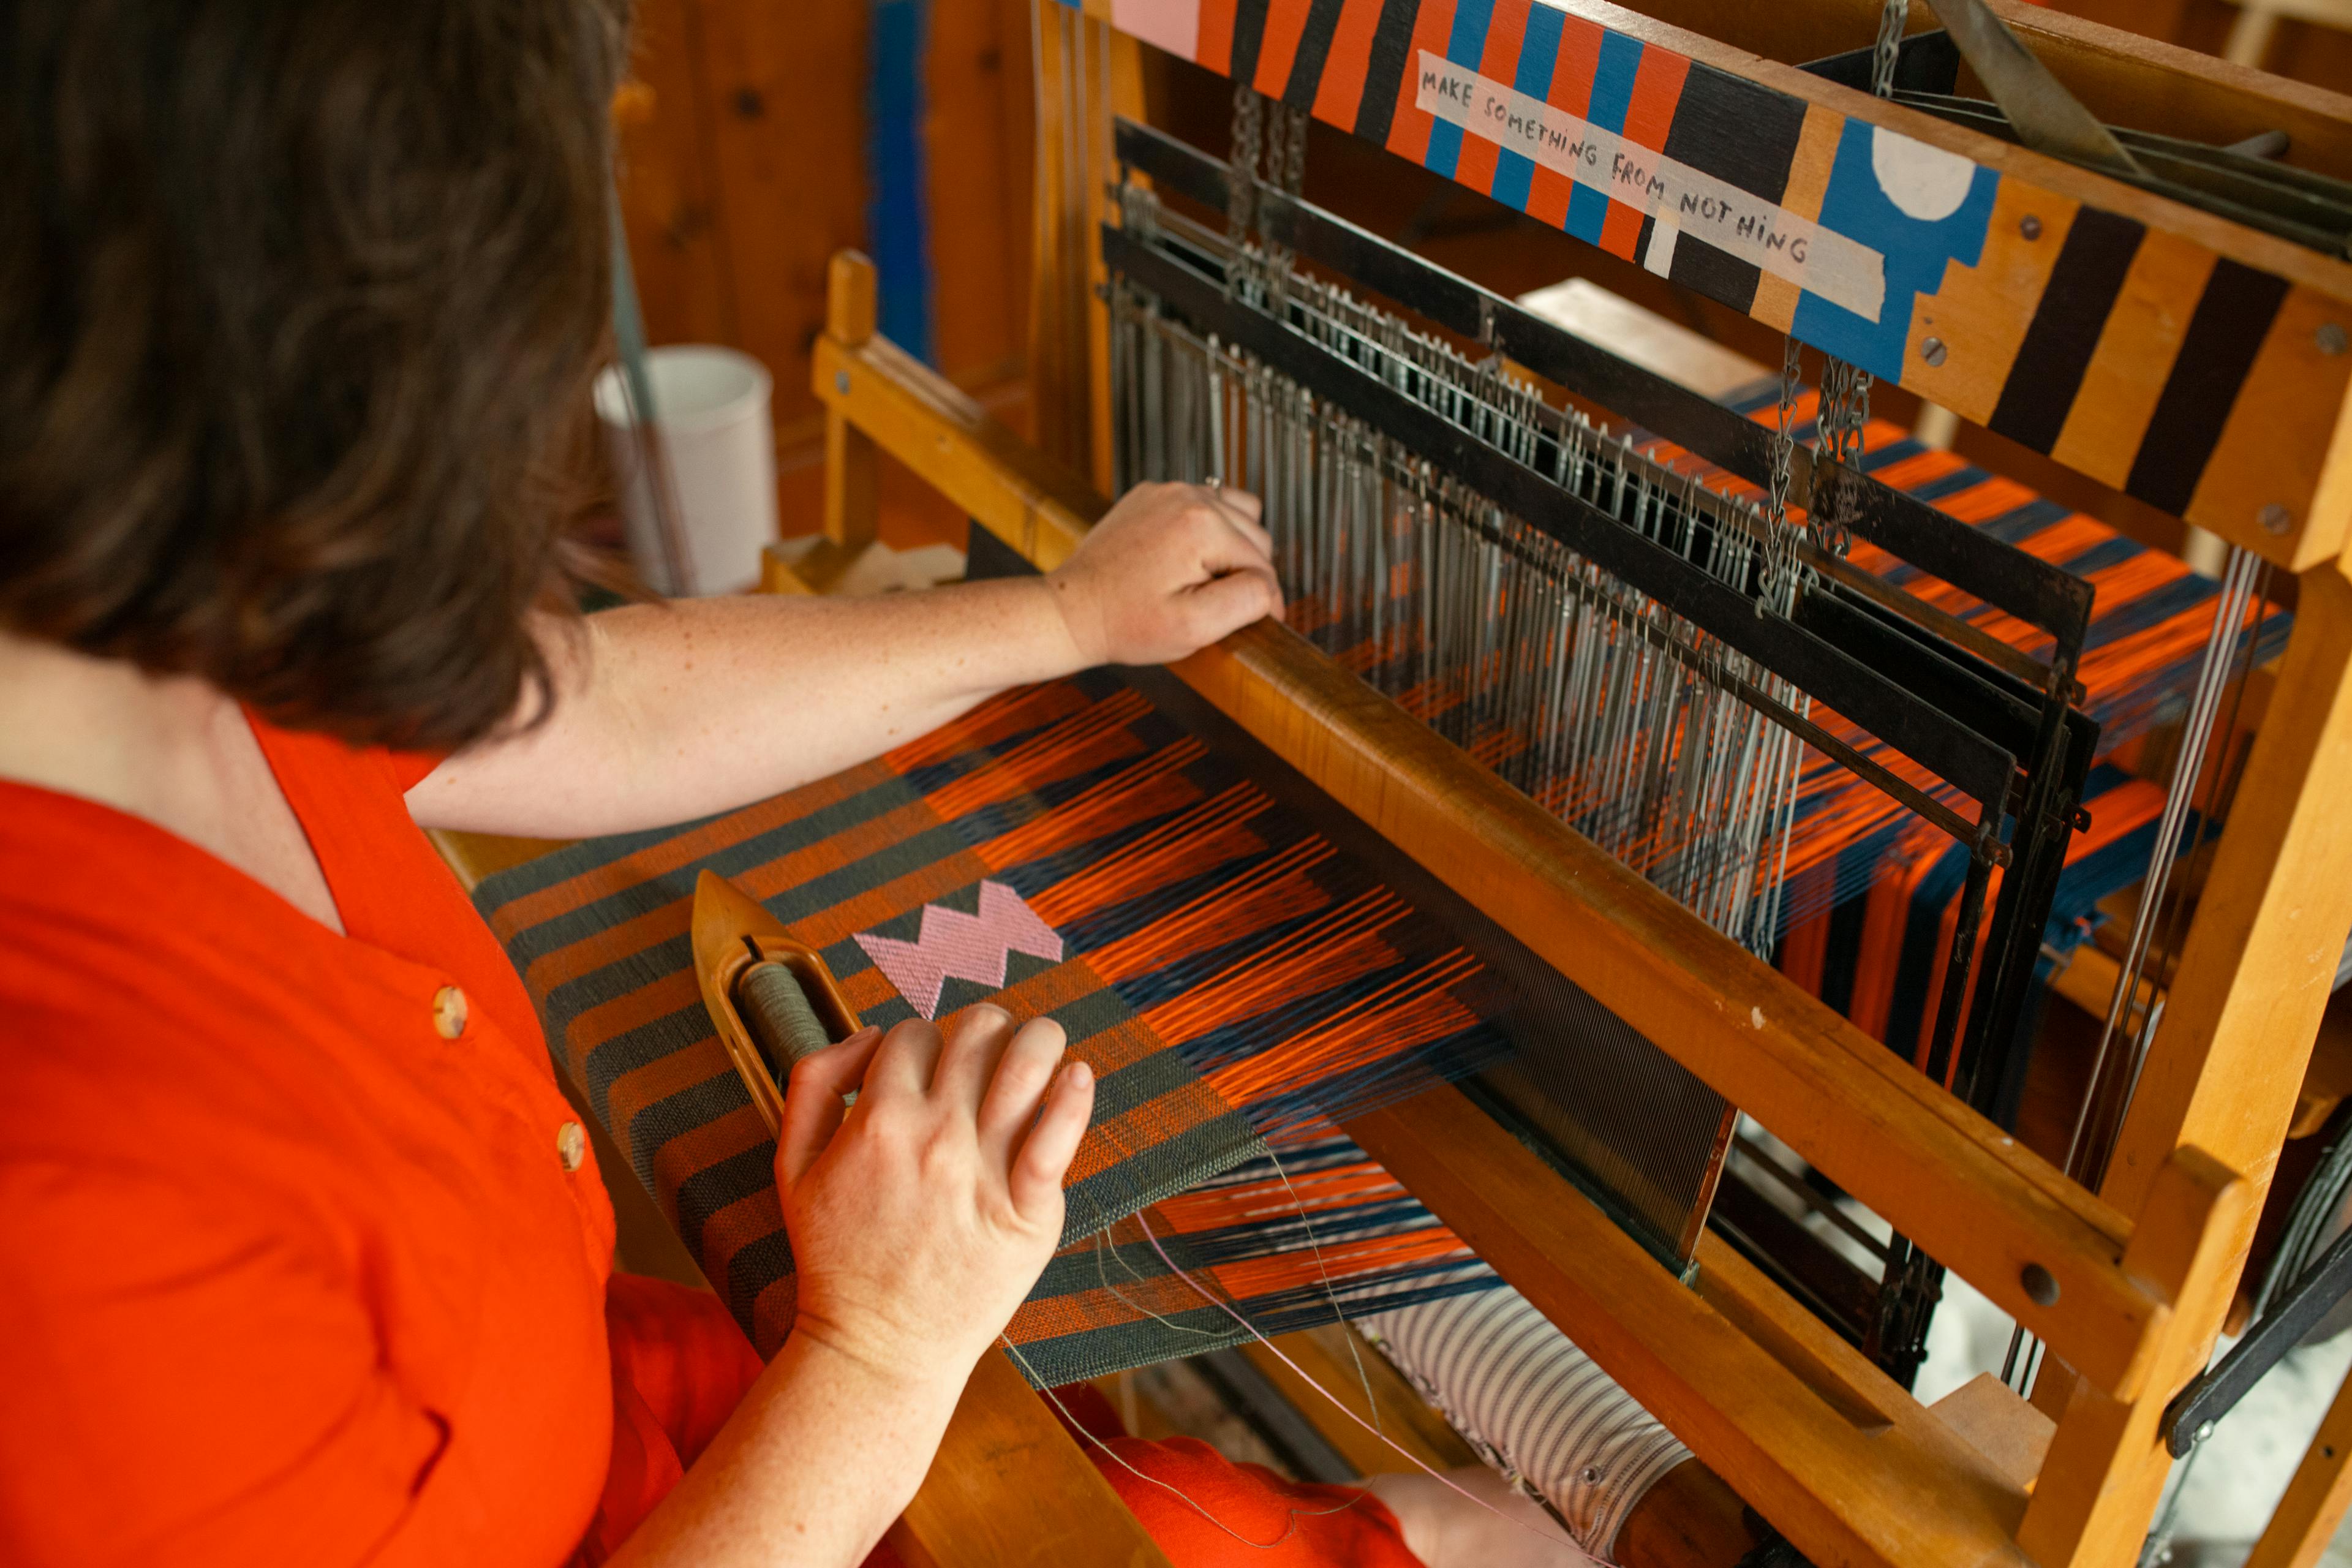 Close-up of artist Sarah Sullivan Sherrod using a loom to create striped, handwoven textiles.